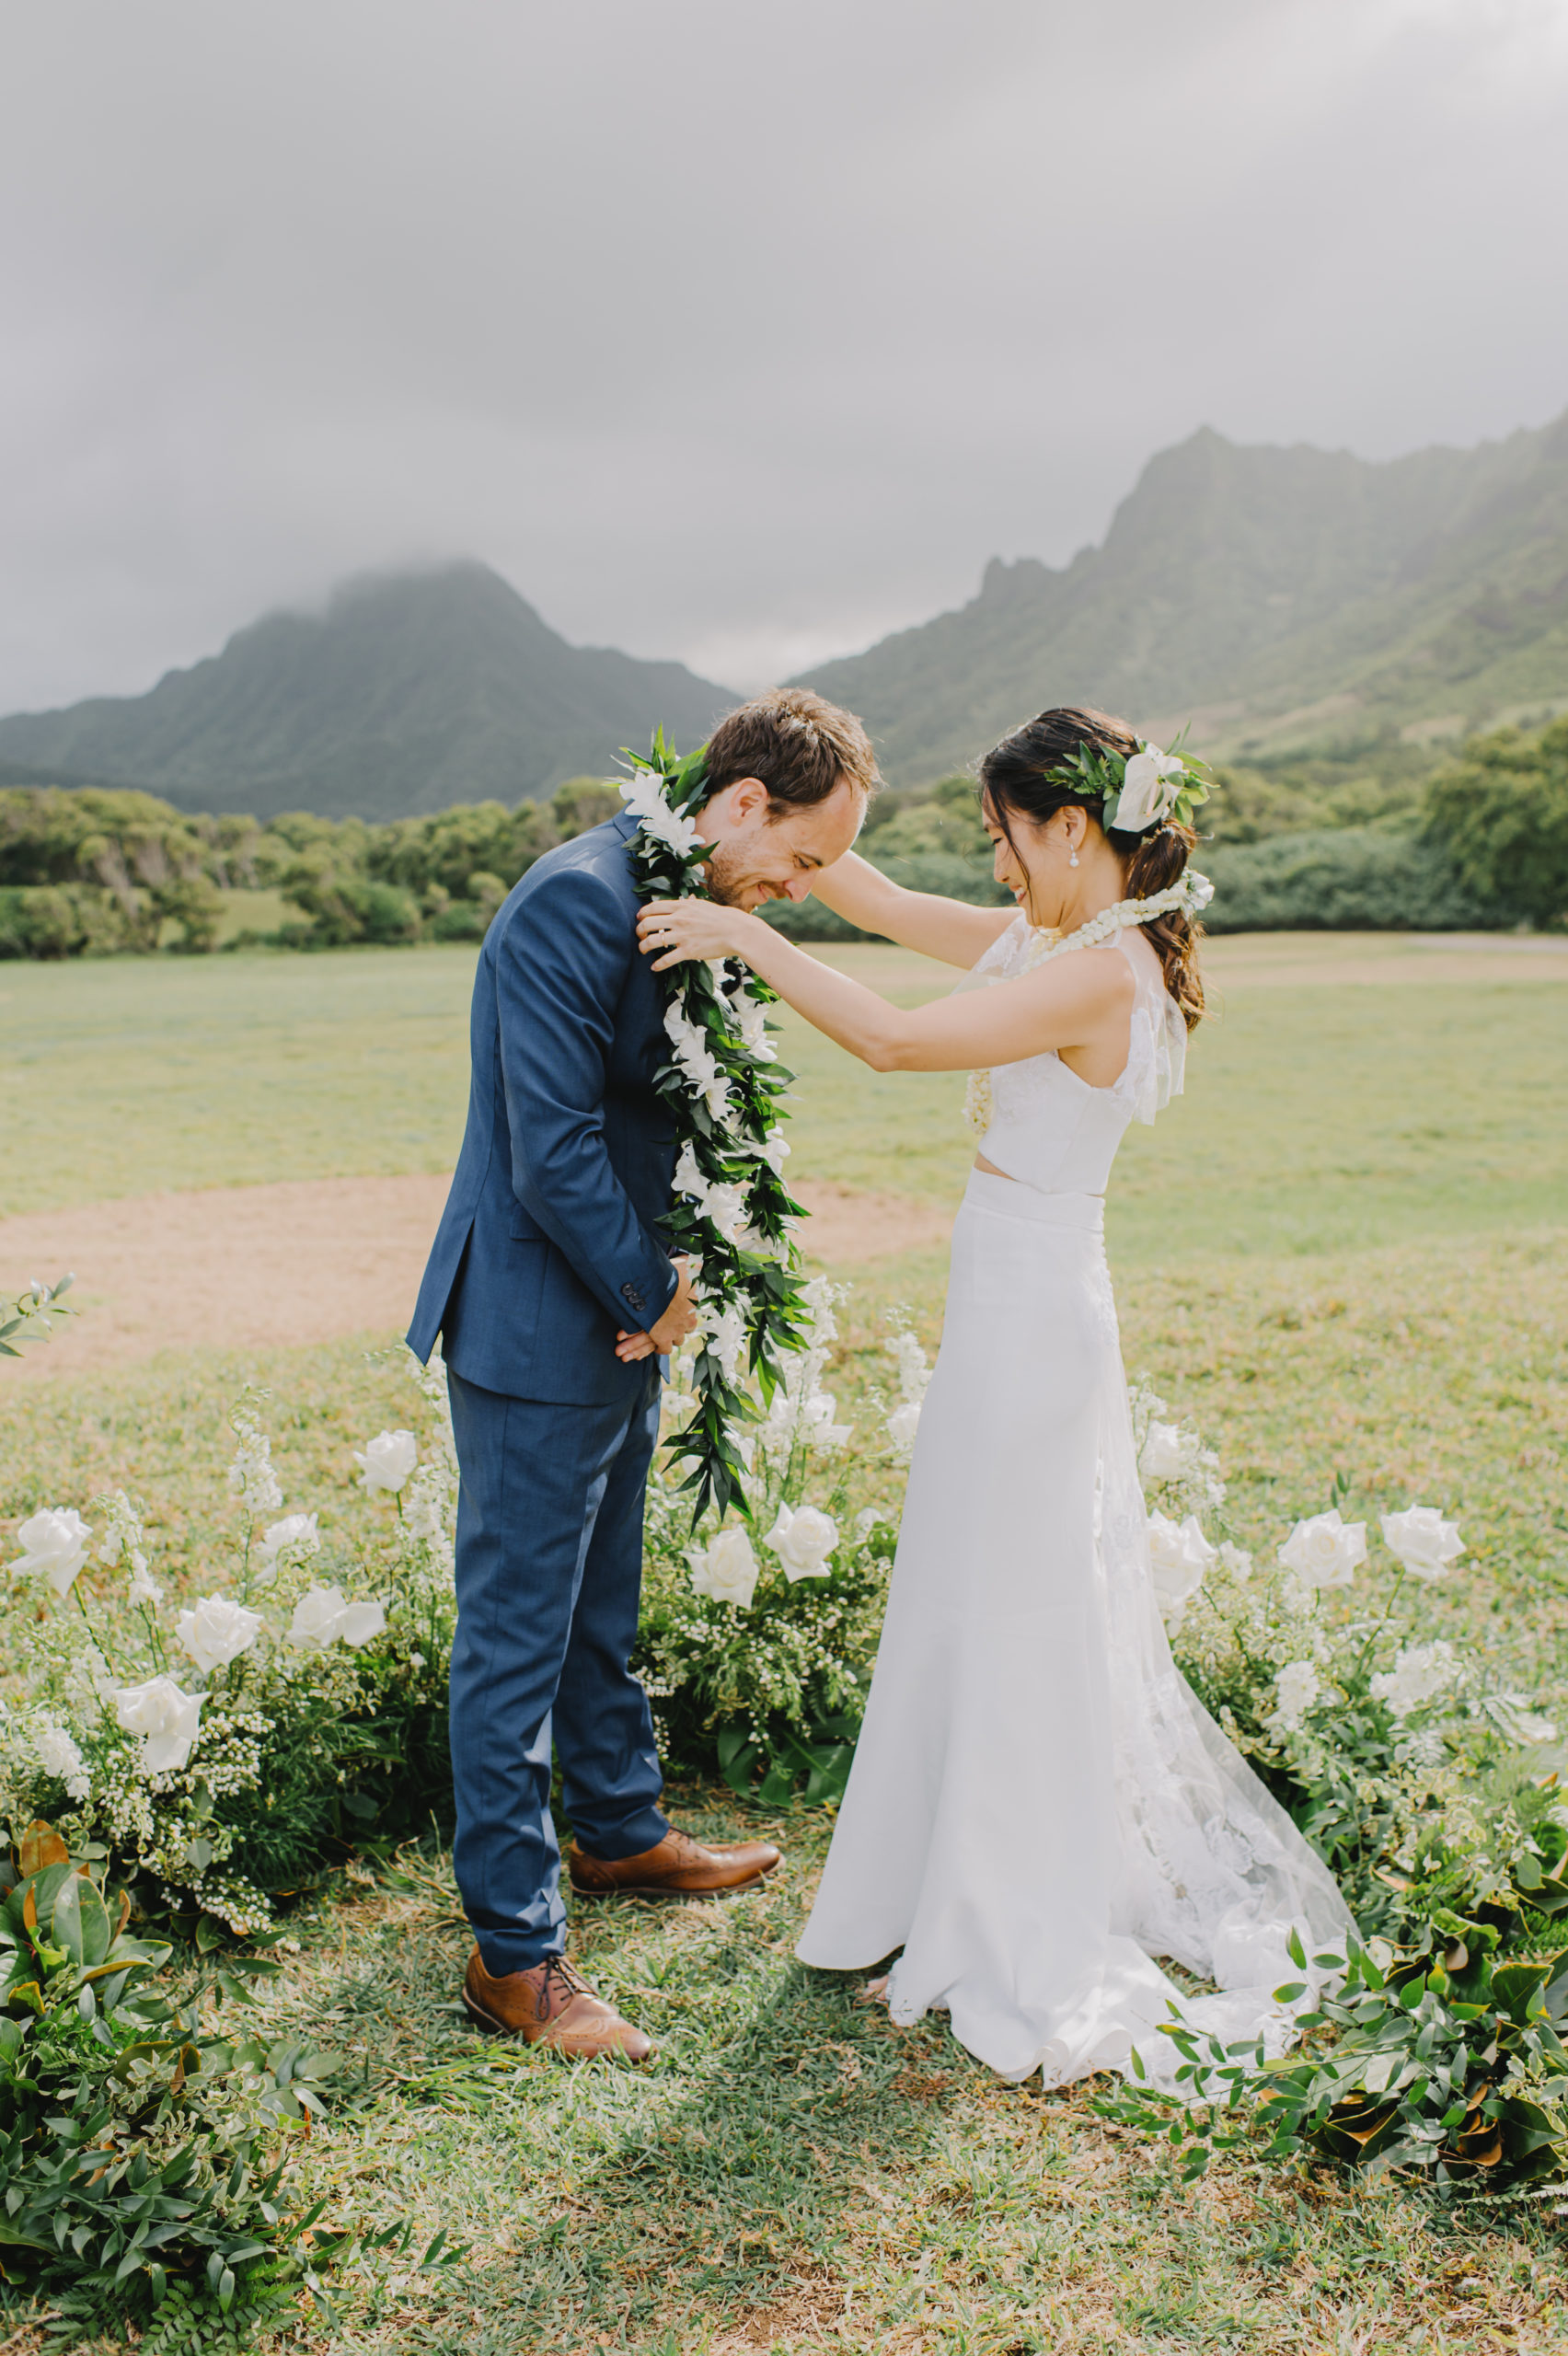 Heartfelt moment as the bride and groom exchange leis at Low Camp Kualoa Ranch L Hewitt Photography